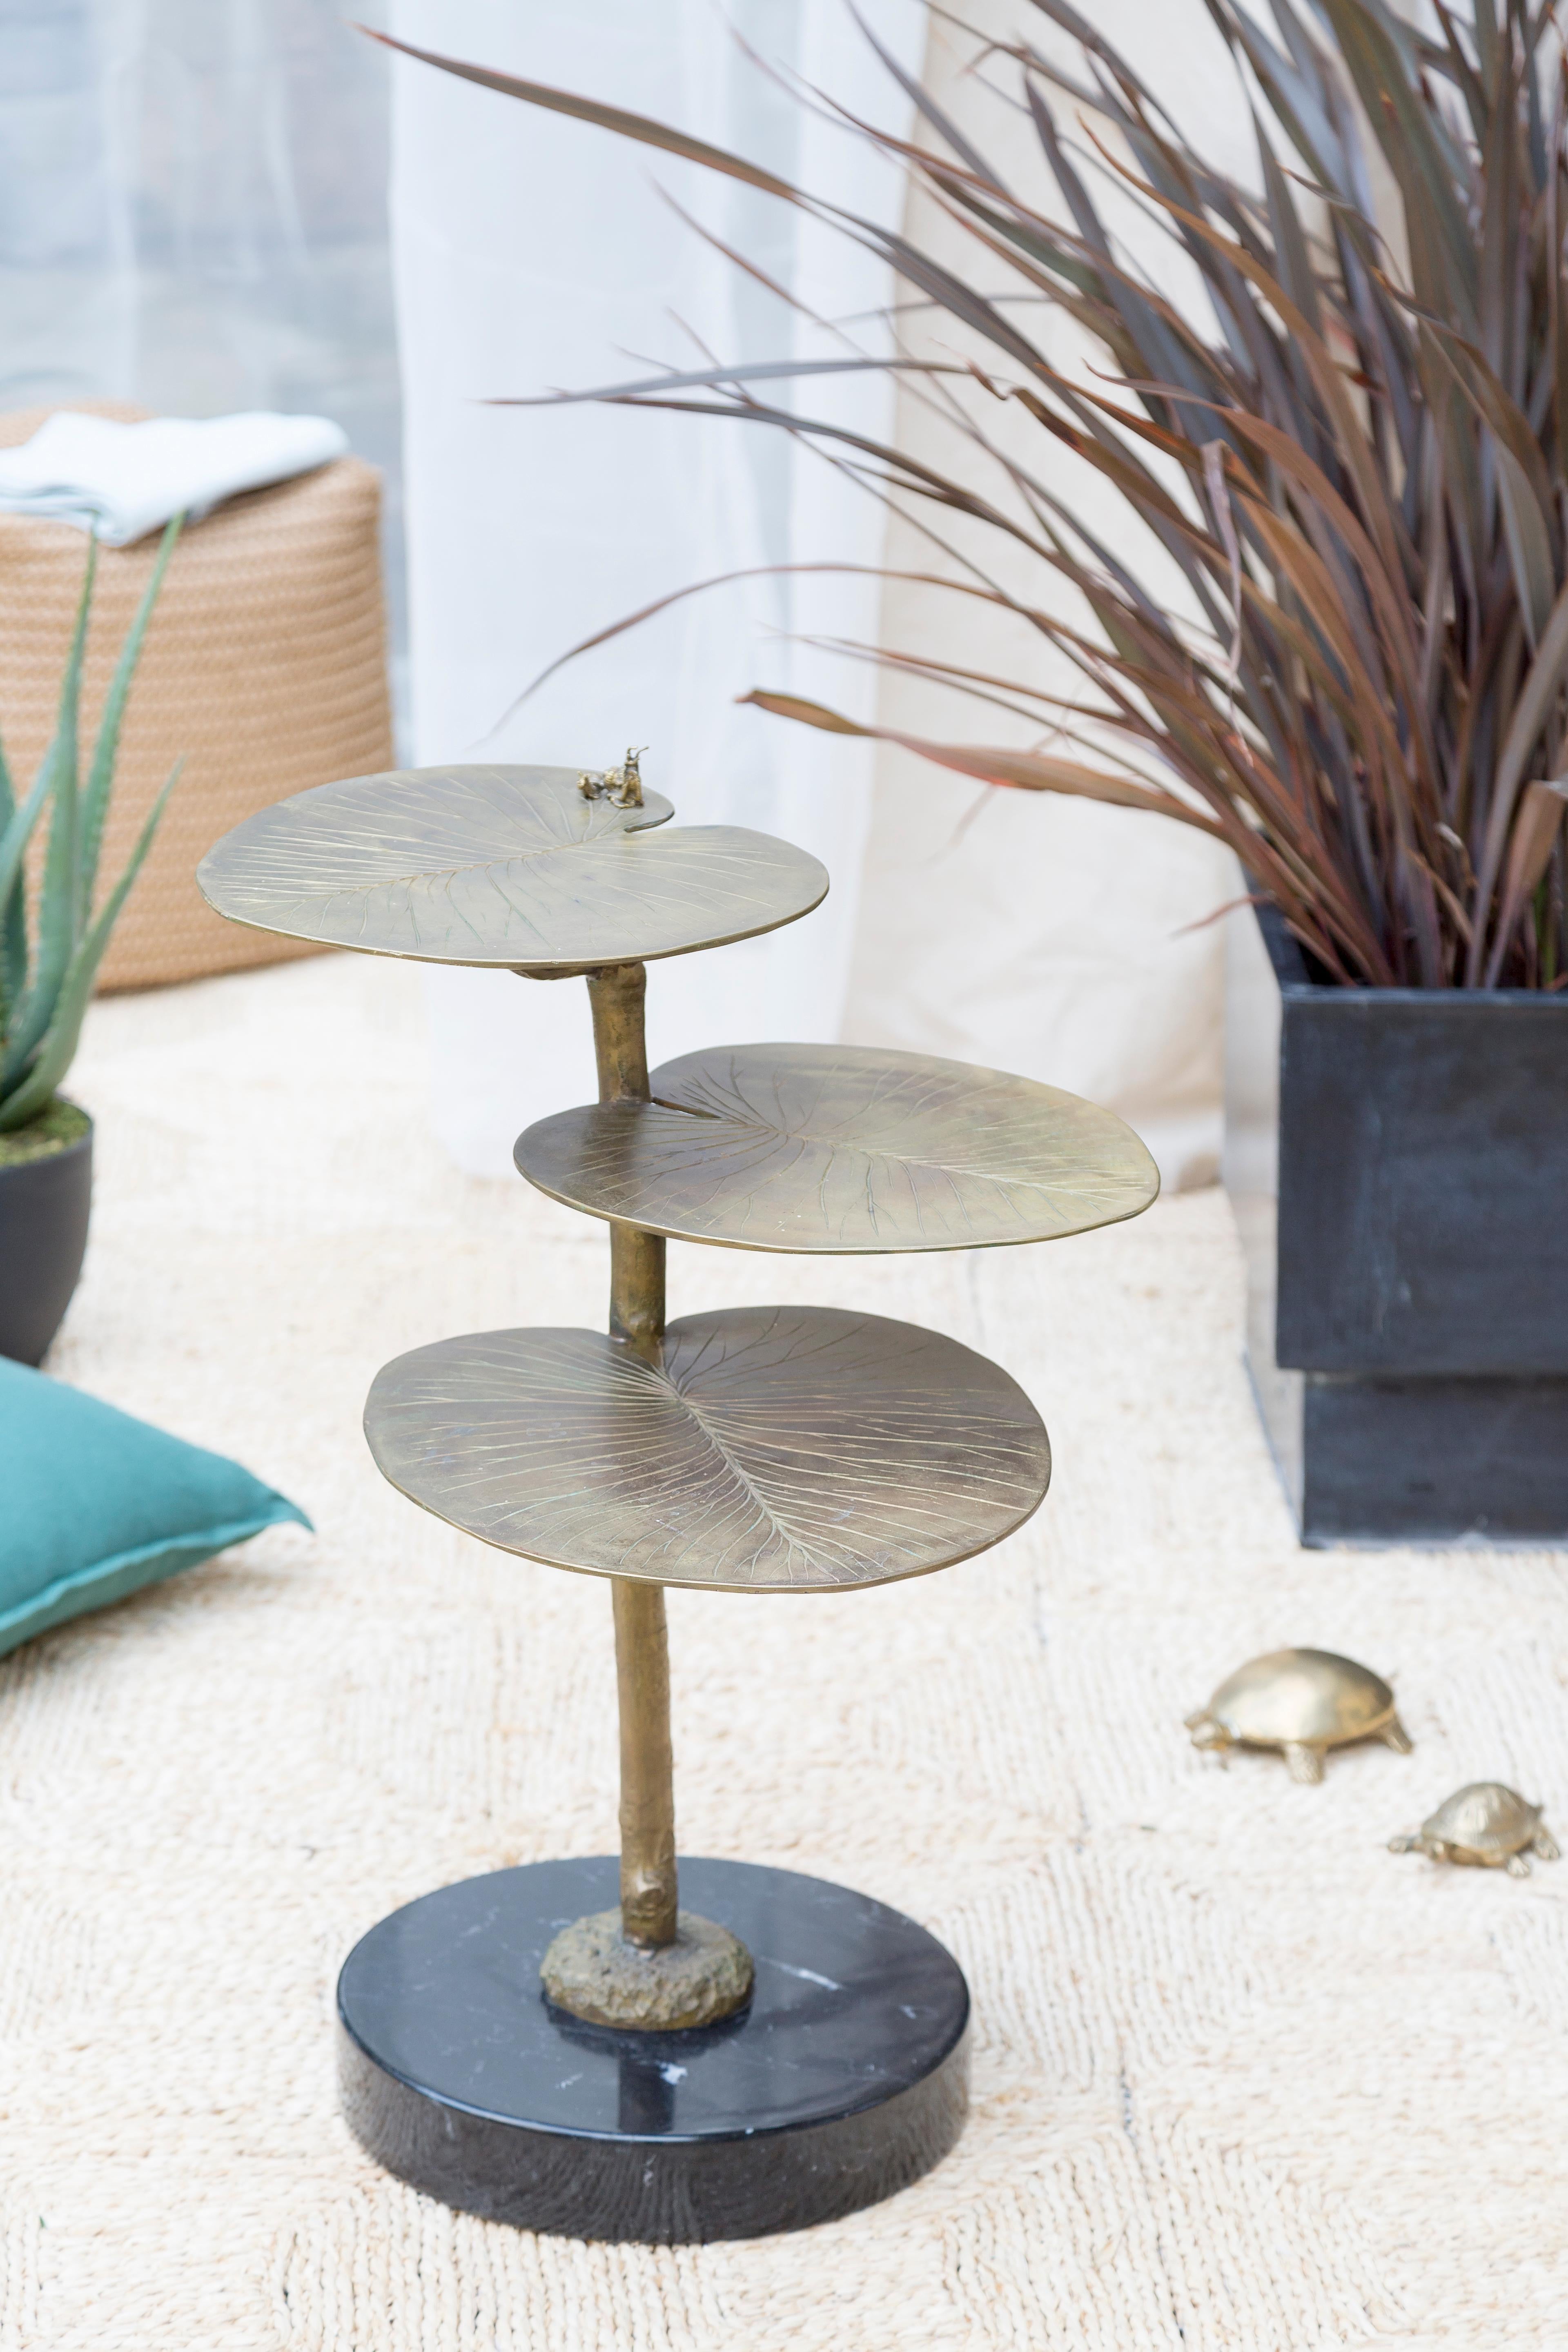 The Oak 06 bistrot table has a brass structure in amber brass finish and a black marble base, it pertains to the Eclectic collection by Bronzetto where each piece is crafted to create irregular and rought surfaces with uneven finishes which best